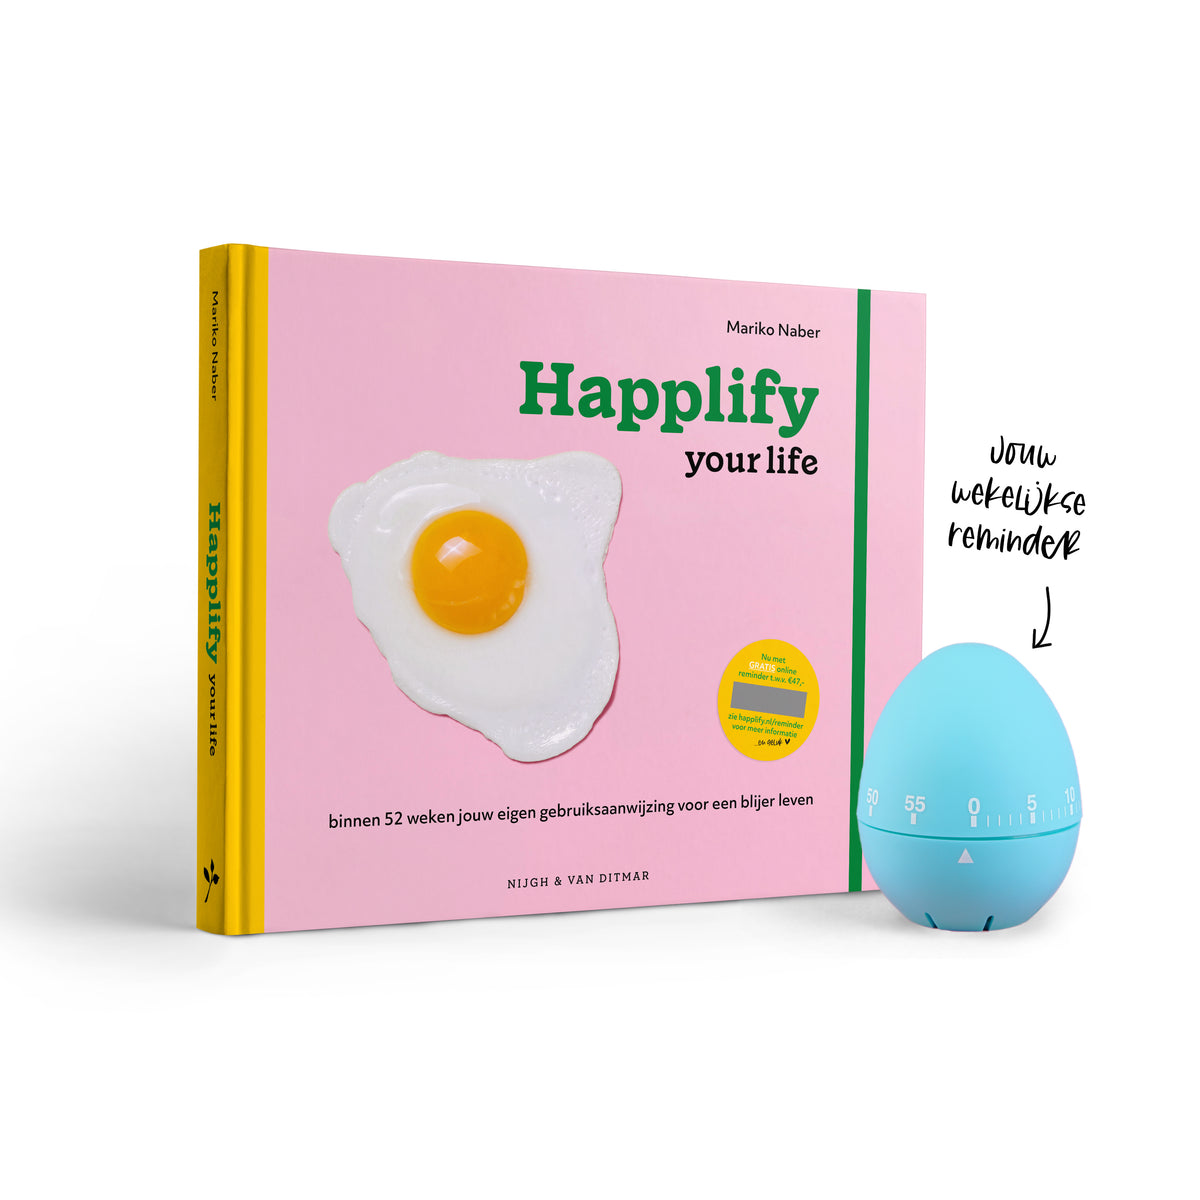 Happlify your life - Reminder - Happlify